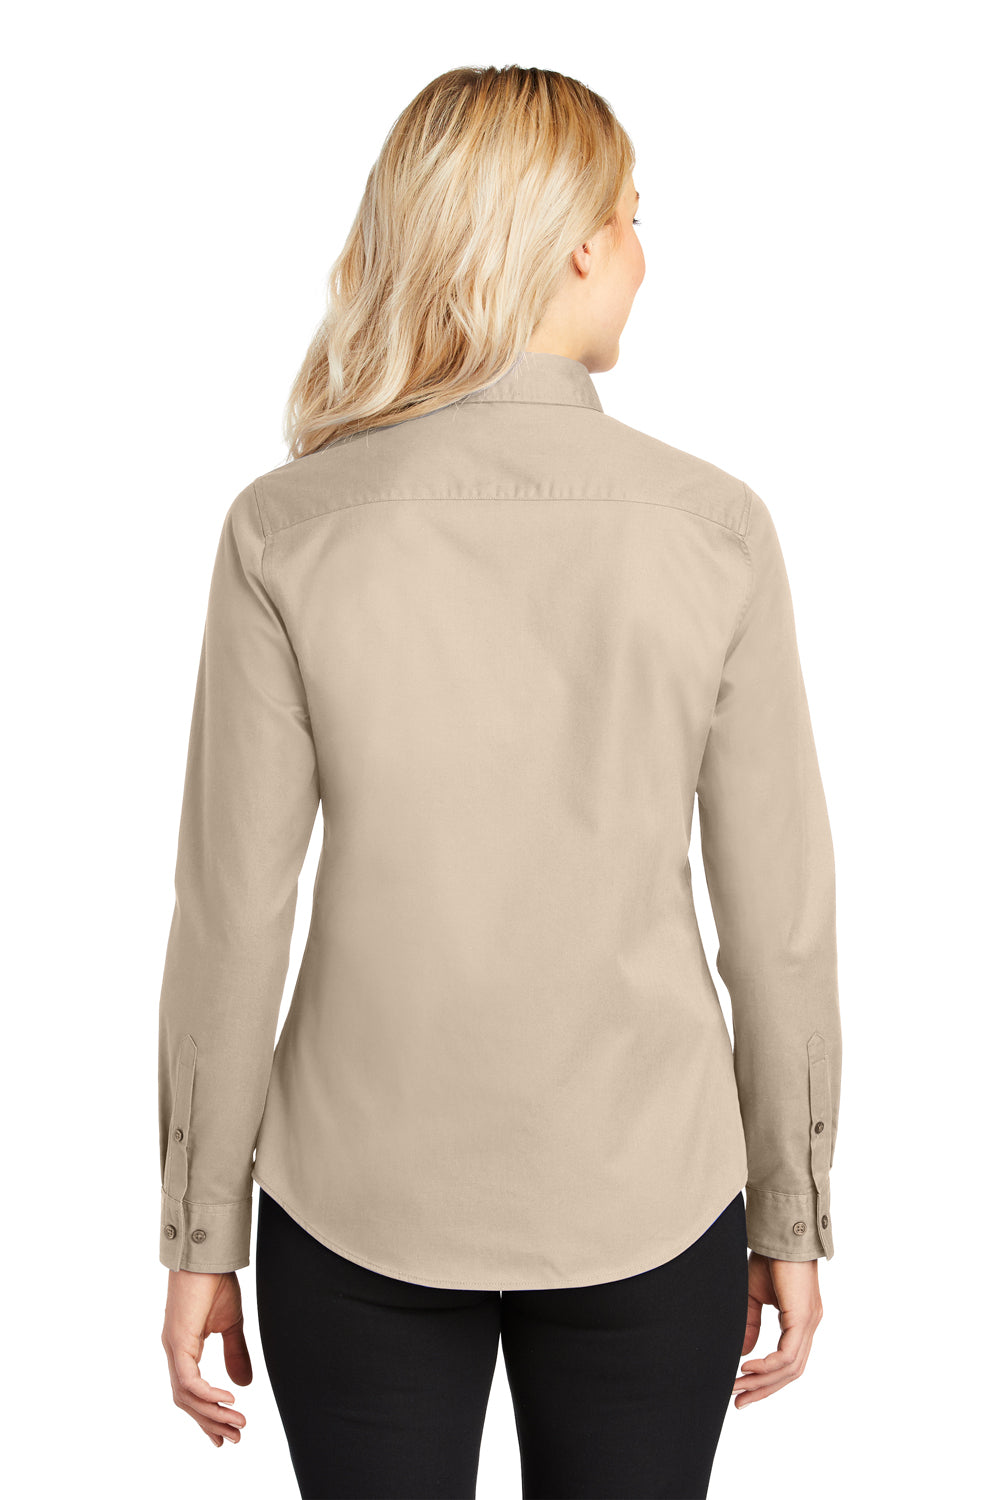 Port Authority L608 Womens Easy Care Wrinkle Resistant Long Sleeve Button Down Shirt Stone Brown Back